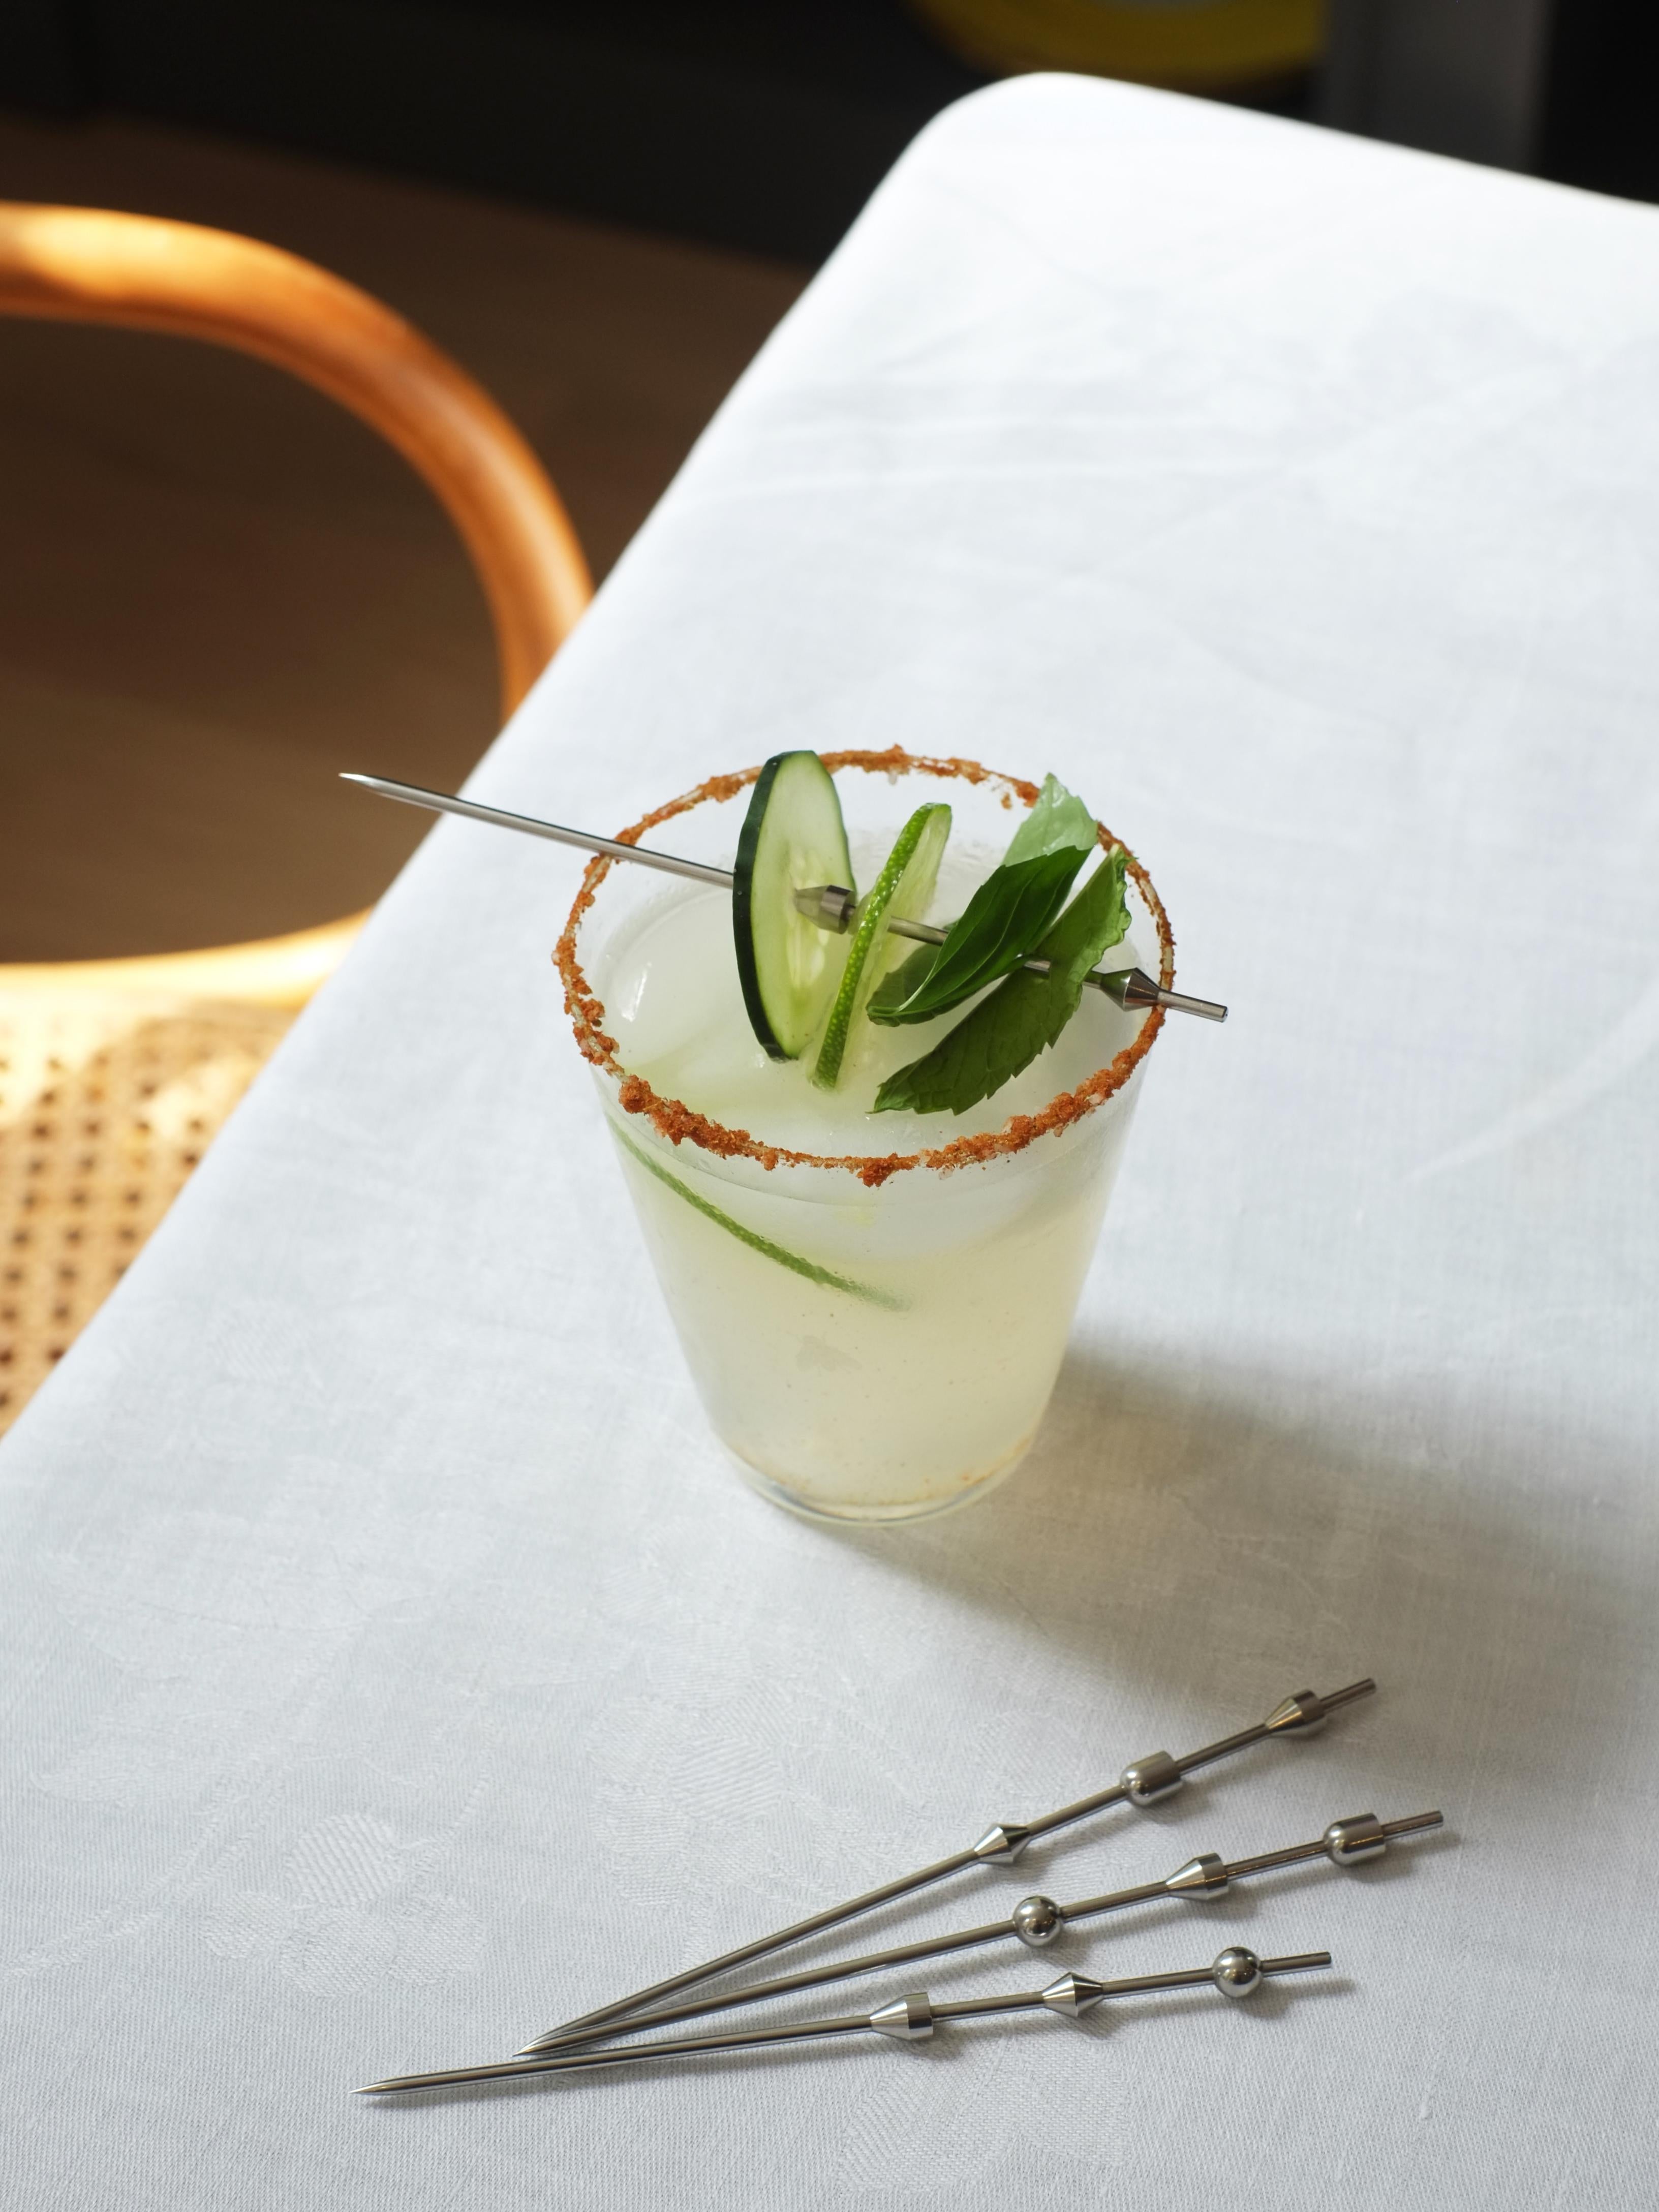 Inspired by the forms of nautical buoys and fishing bobbers, these stainless steel picks keep cocktail garnishes afloat! Using simple, geometric forms along a thin rod, the contemporary designs make any drink more professional and any bar more